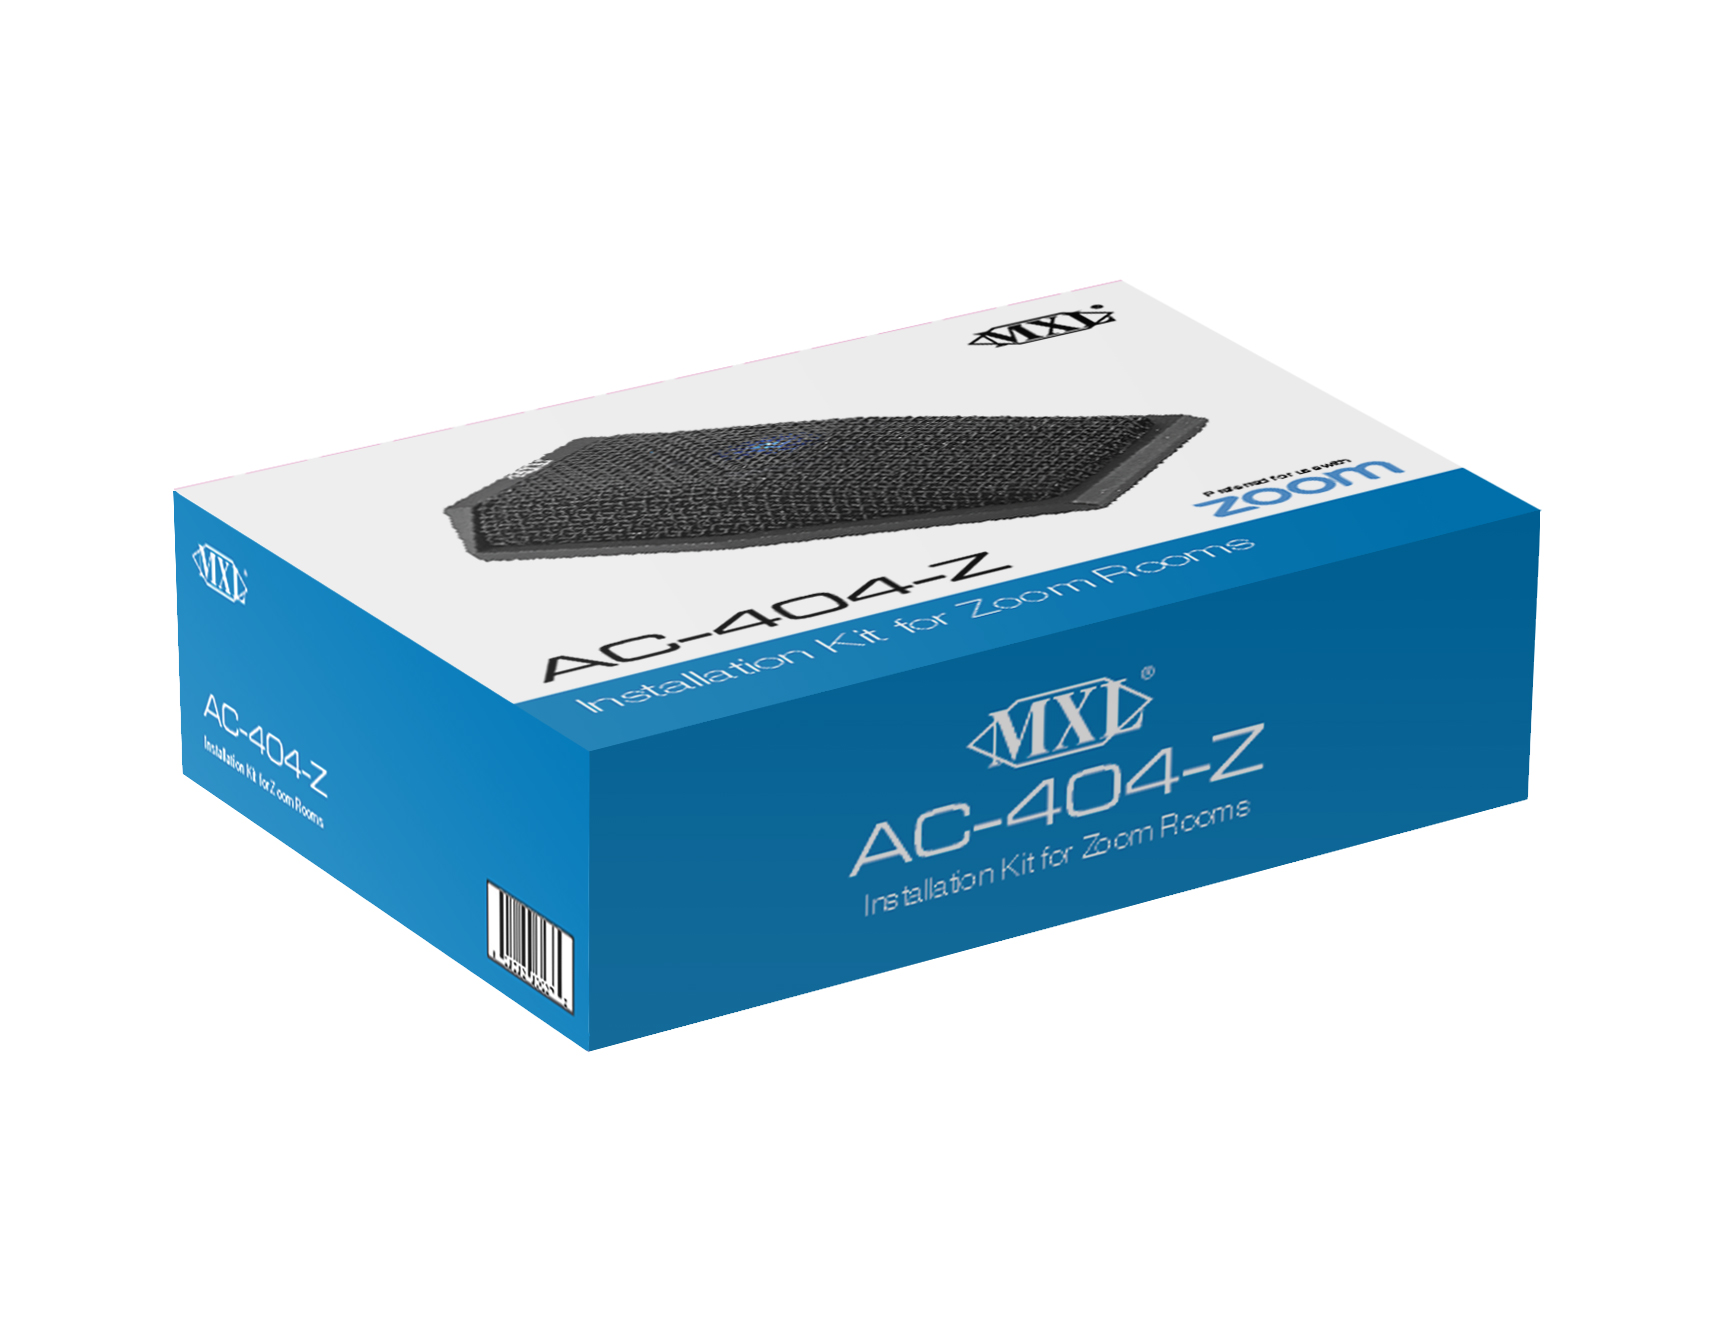 No Packaging MXL USB plug and play microphone Model AC-404-Z NP